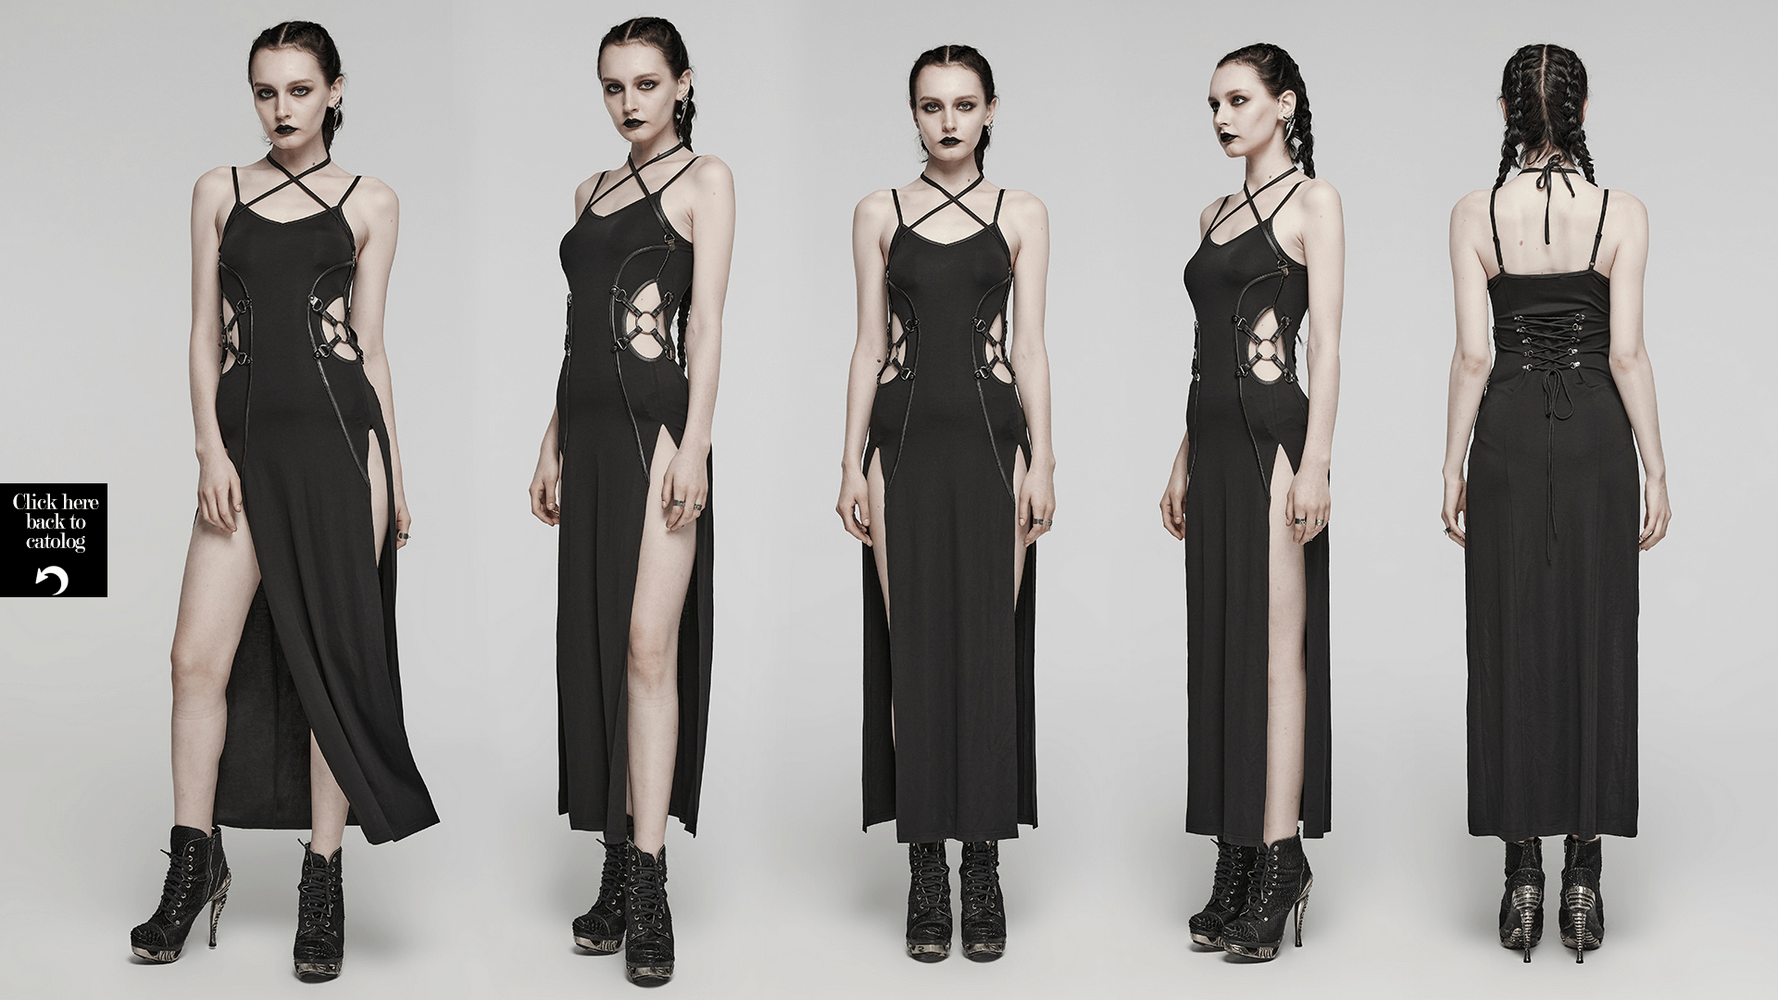 Edgy Long Two-Way Straps Dress with Slits and Lace Up